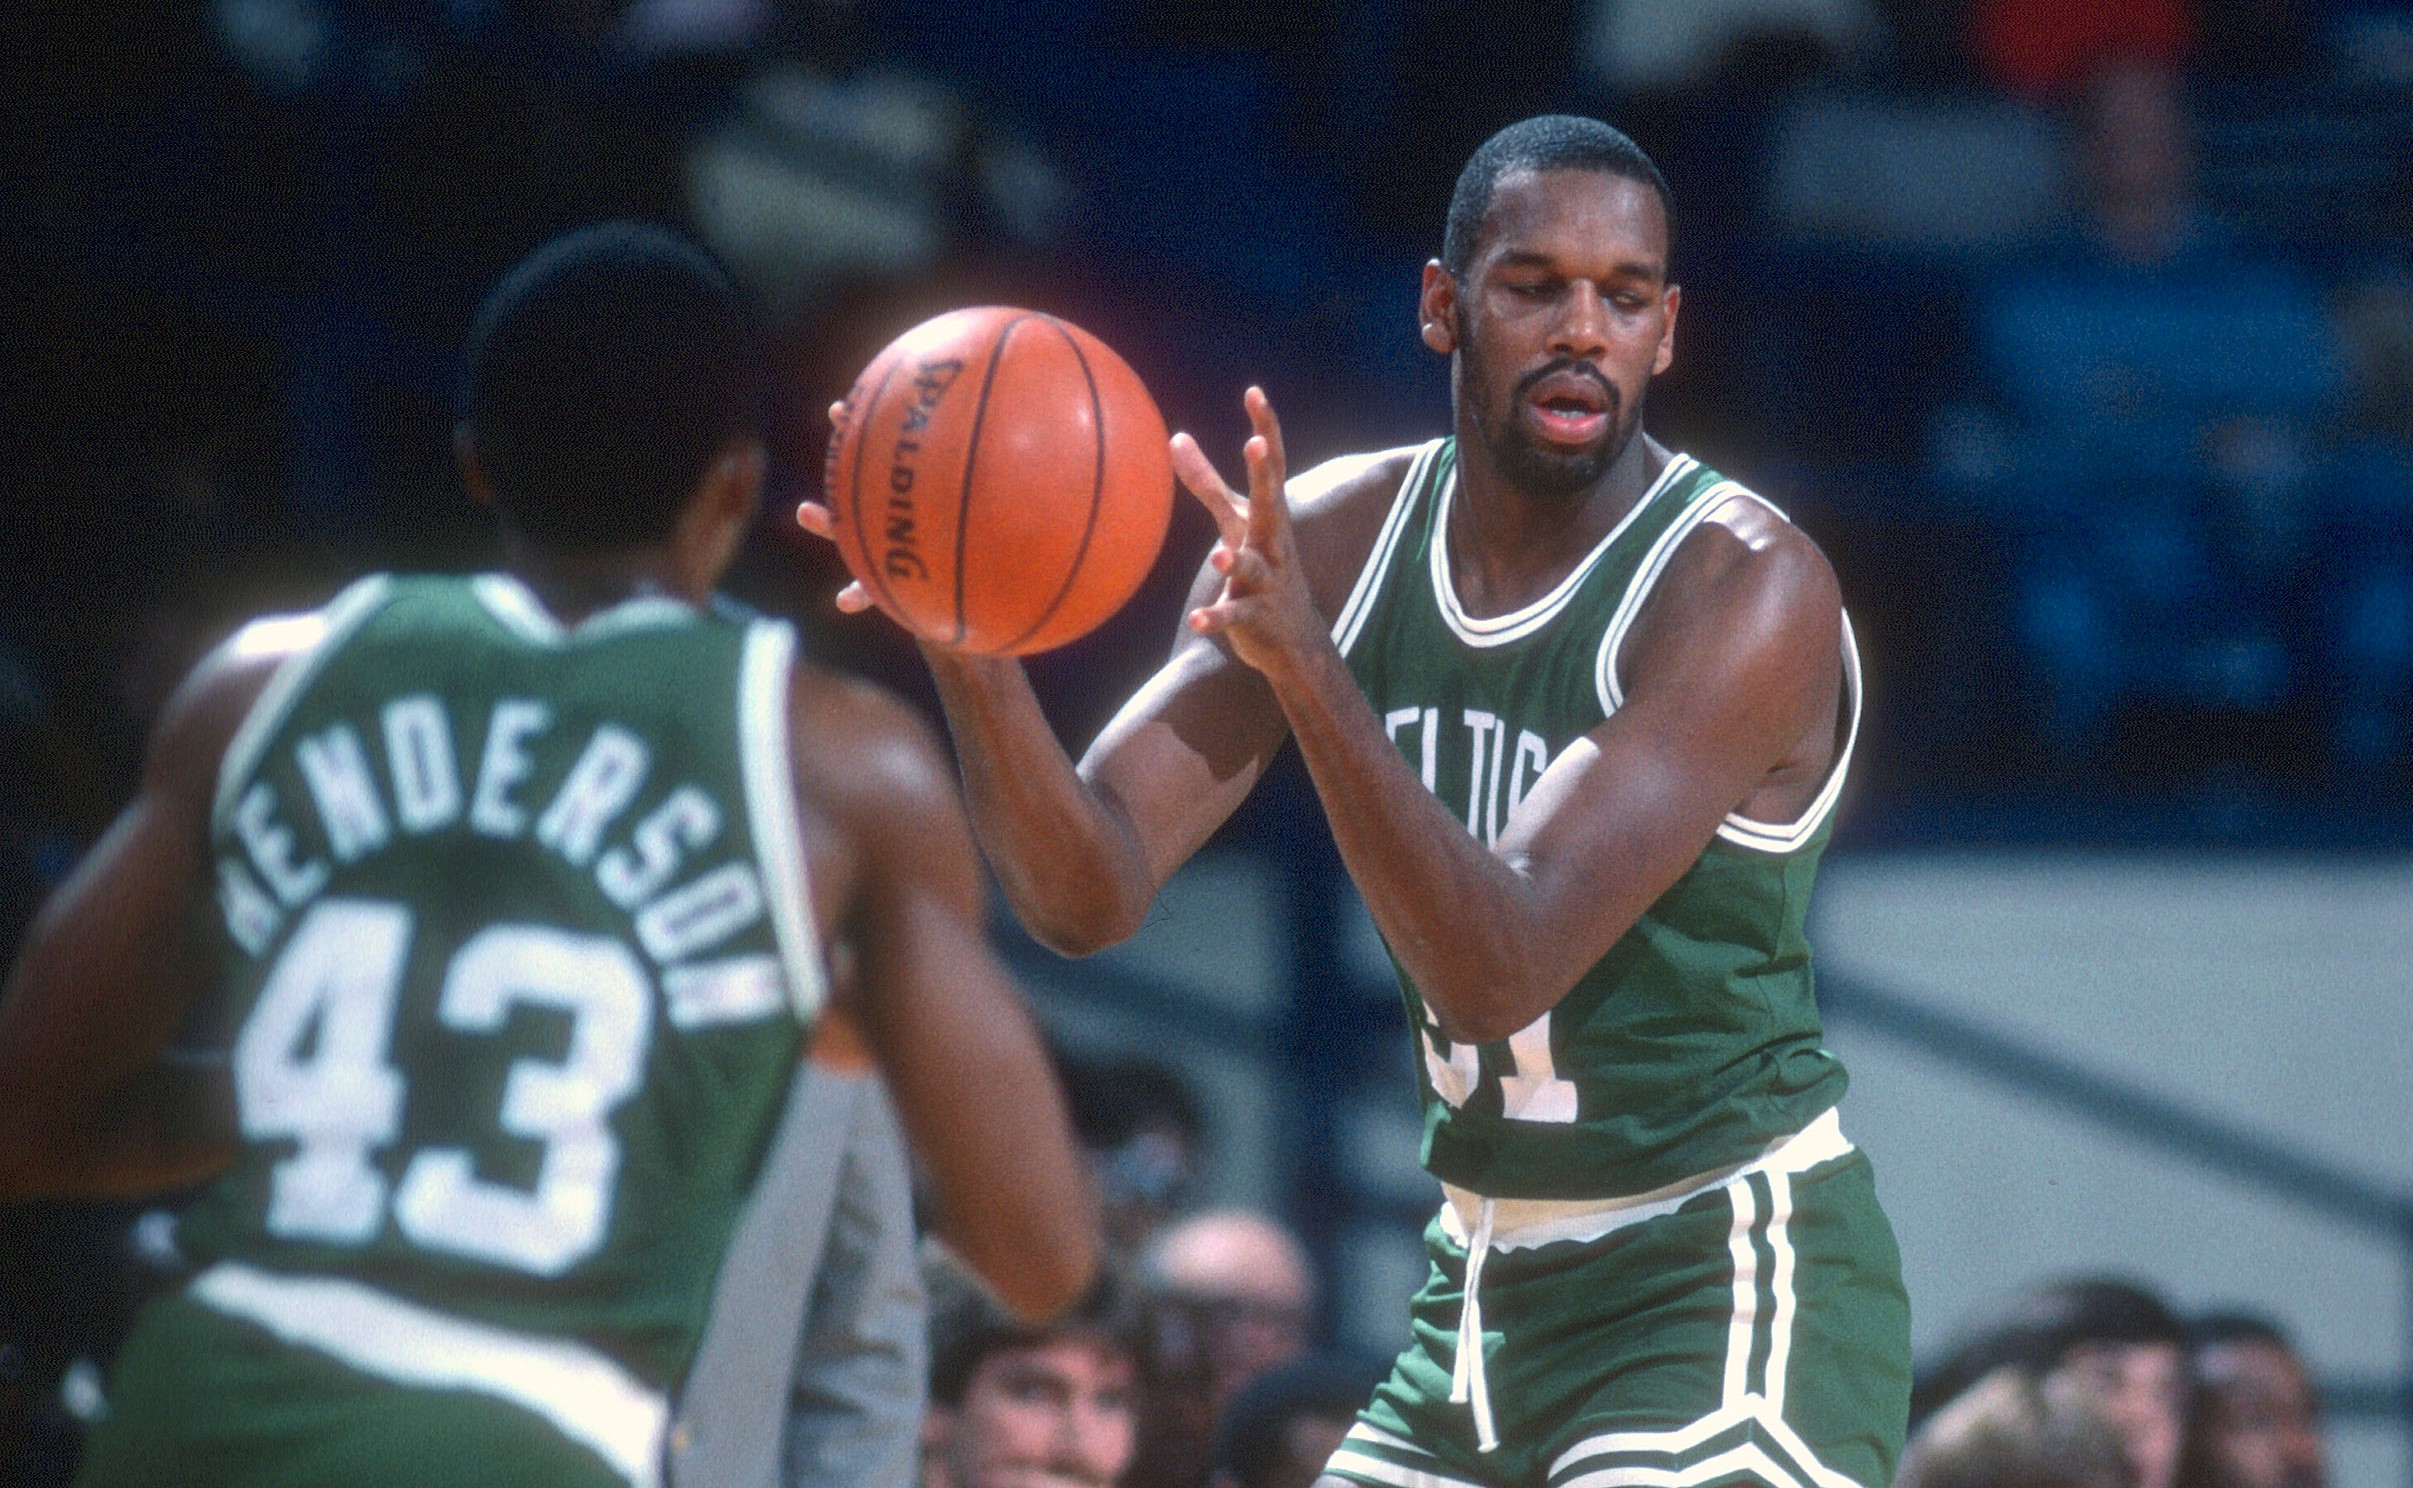 Cedric Maxwell Said Parting With His 1984 Boston Celtics Championship Ring Wasn’t That Difficult